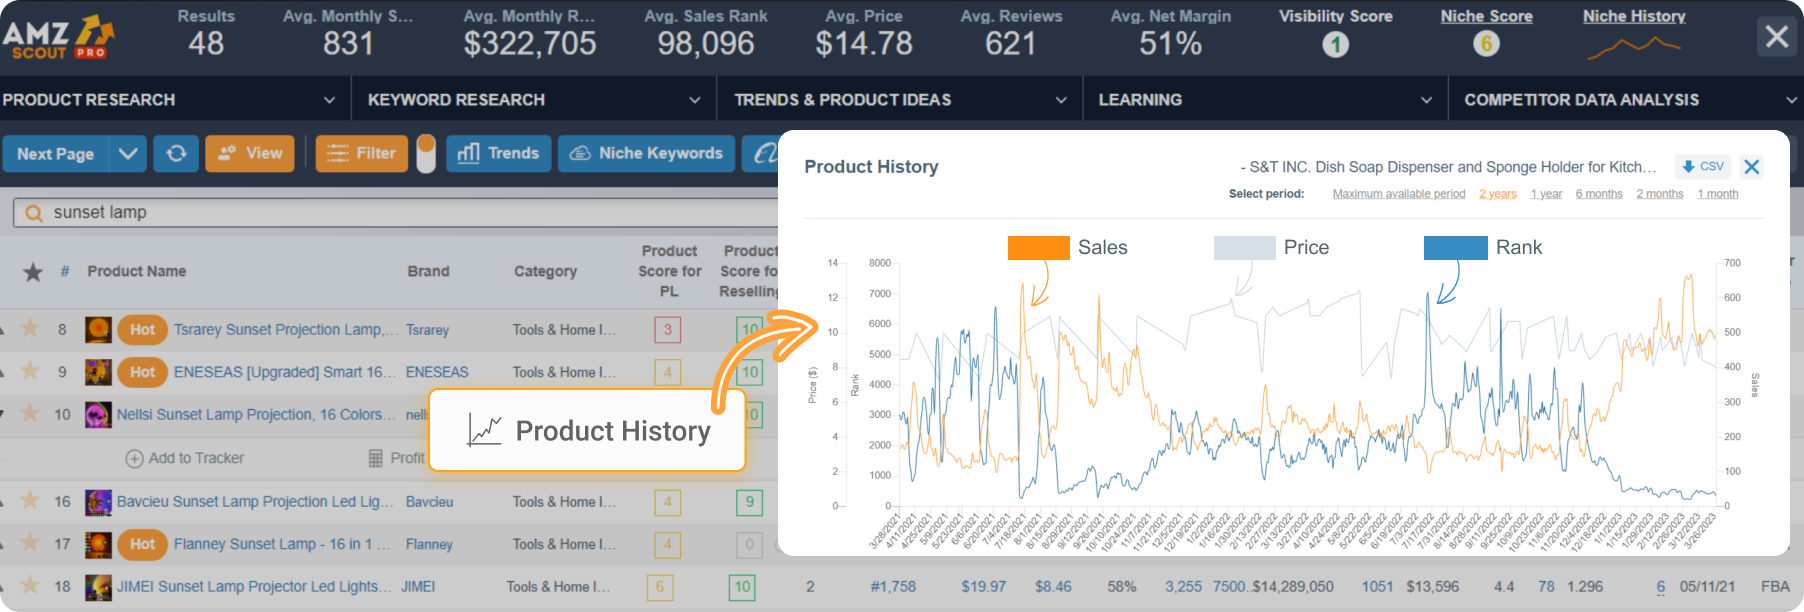 How to track product history using AMZScout